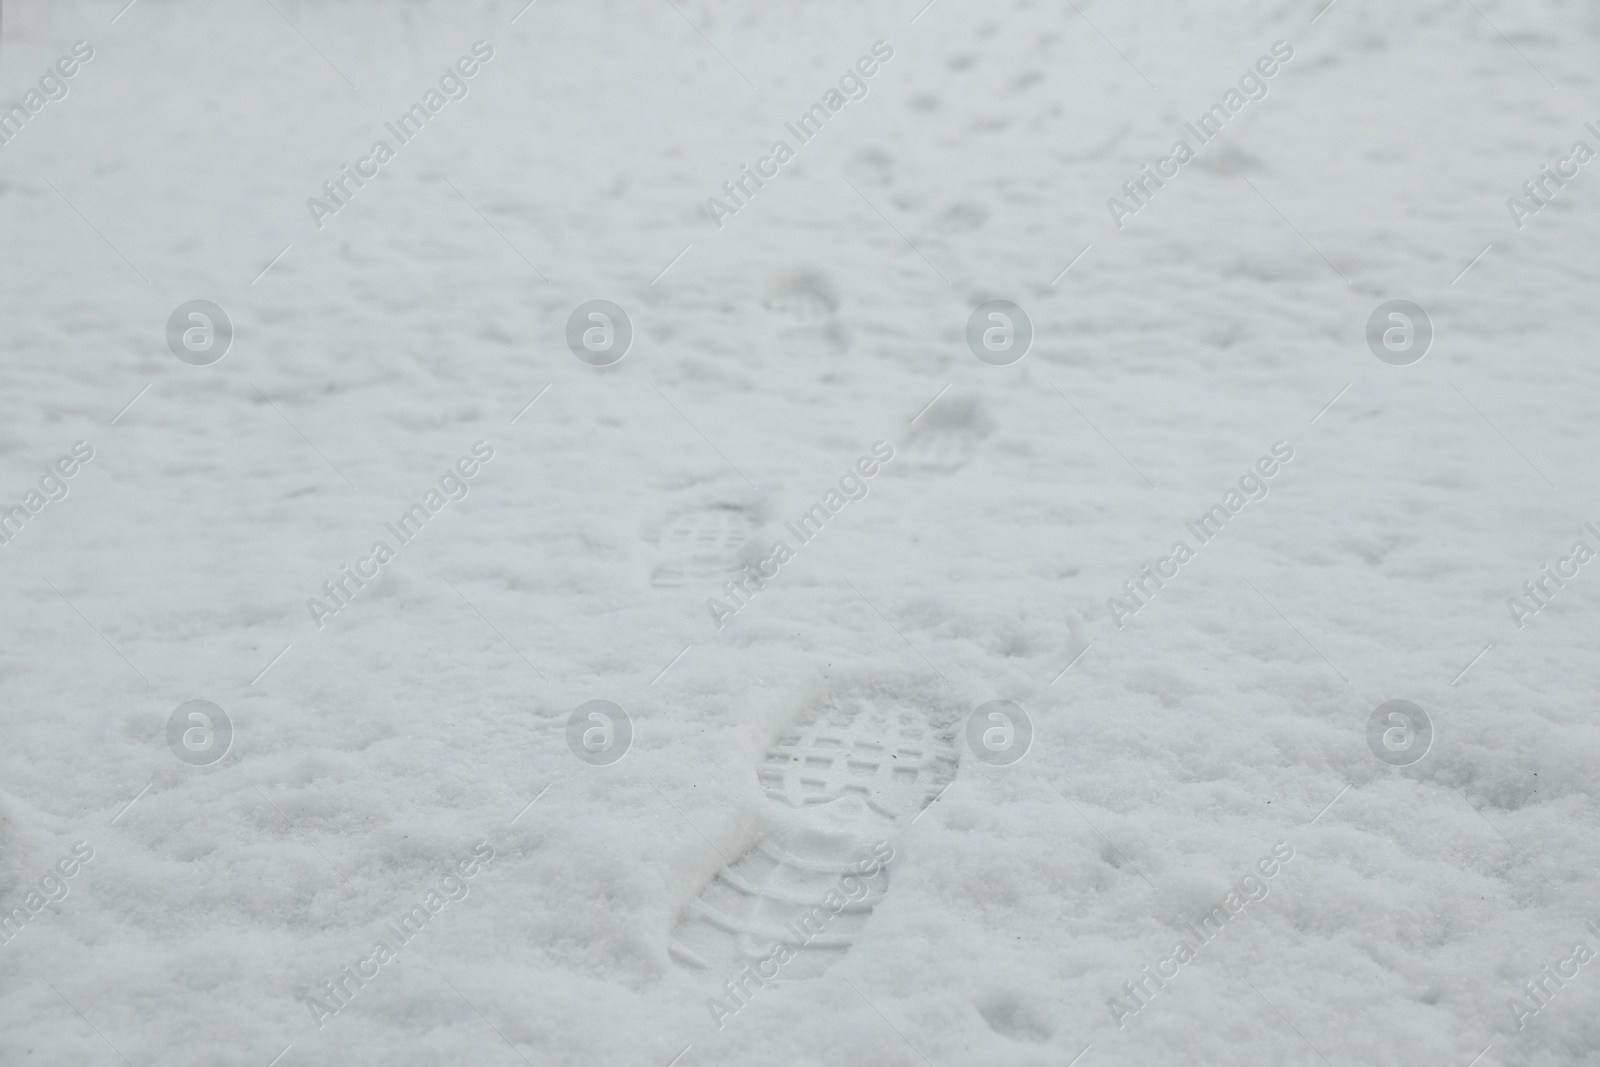 Photo of Bootprints in snow outdoors on winter day